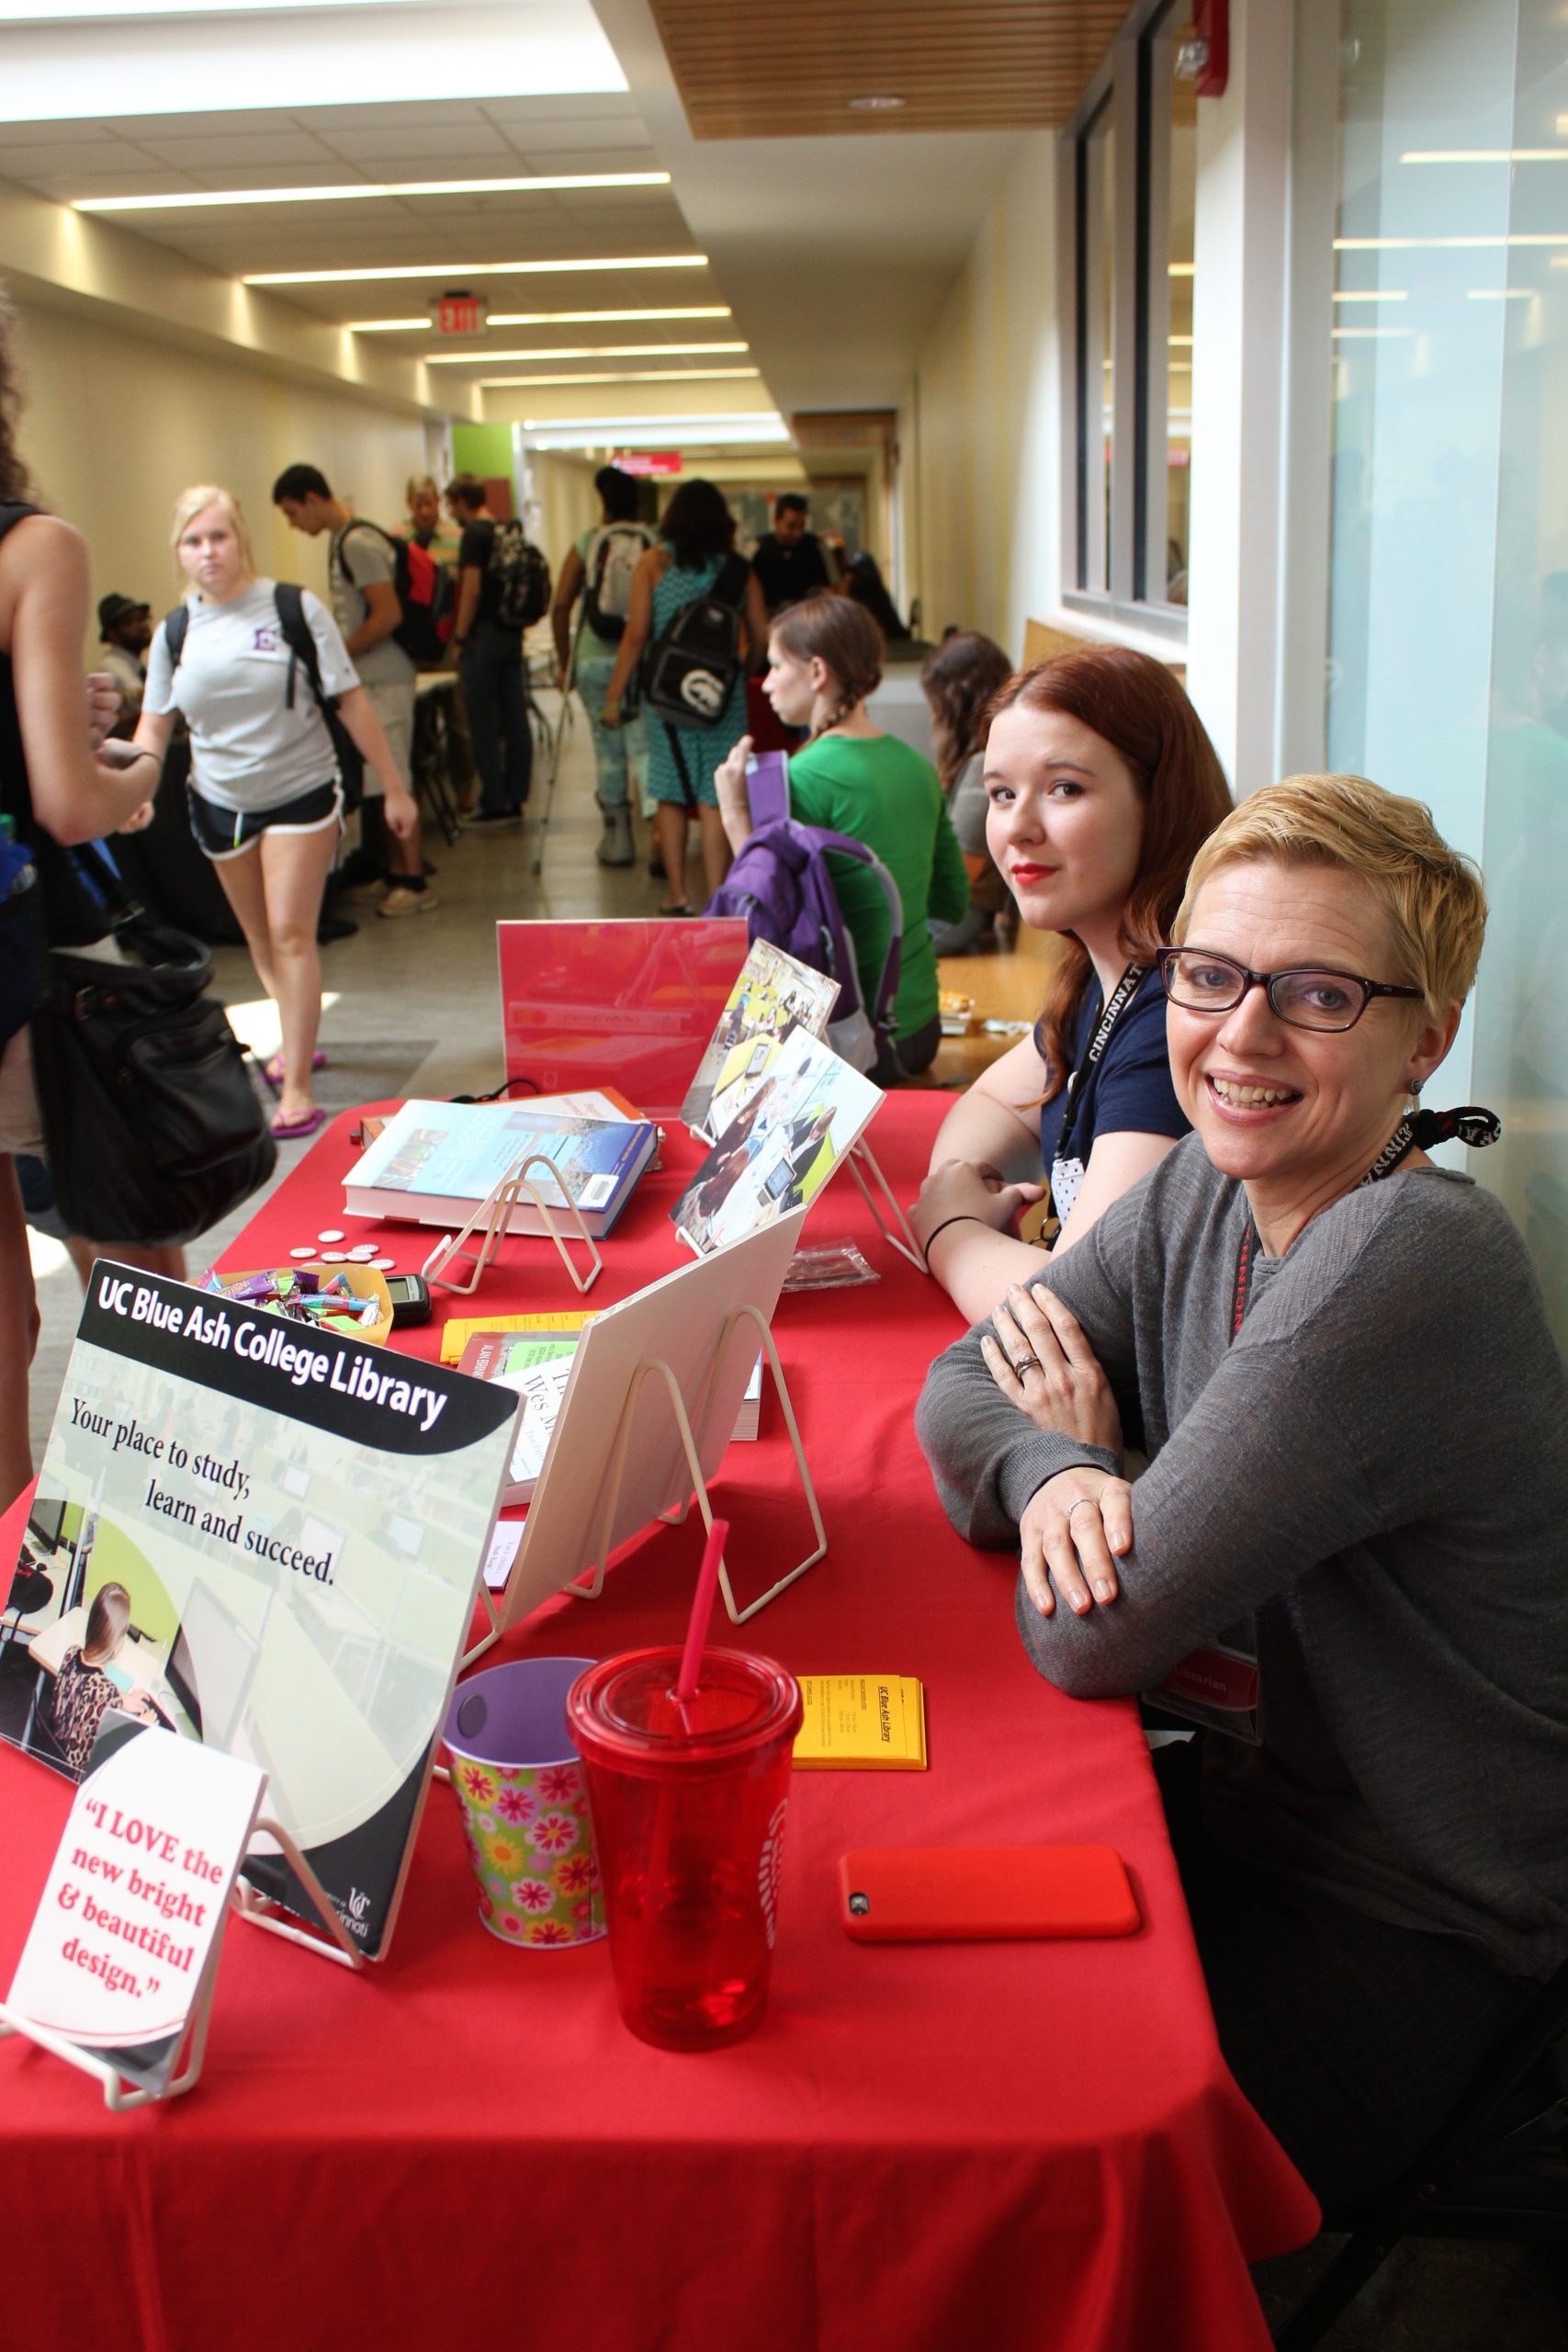 Heather Maloney and Student Worker staffing table